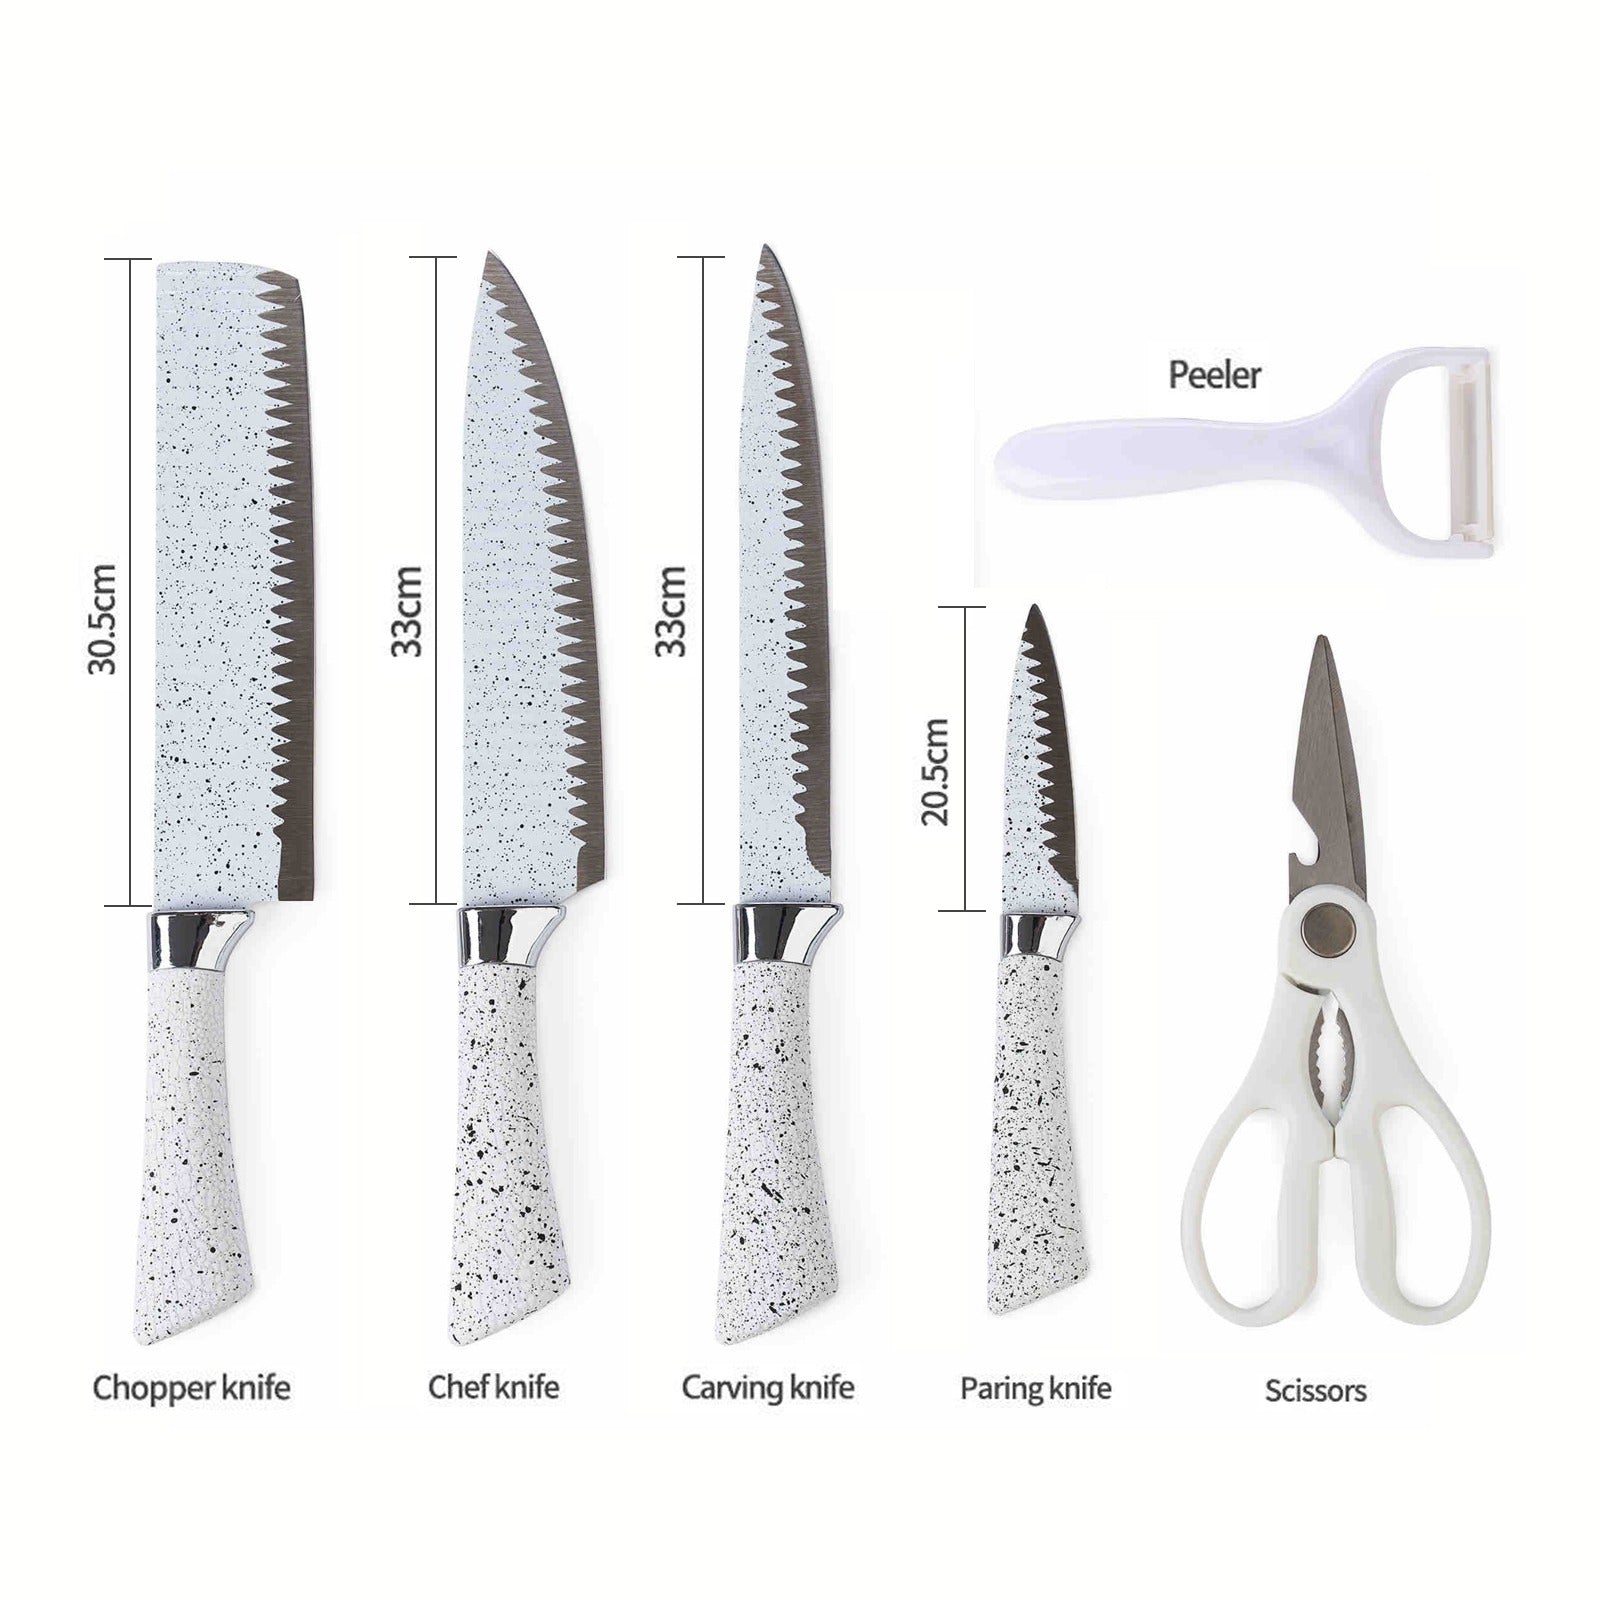 Non-Stick Coated 6 Pcs Knife Set with its size